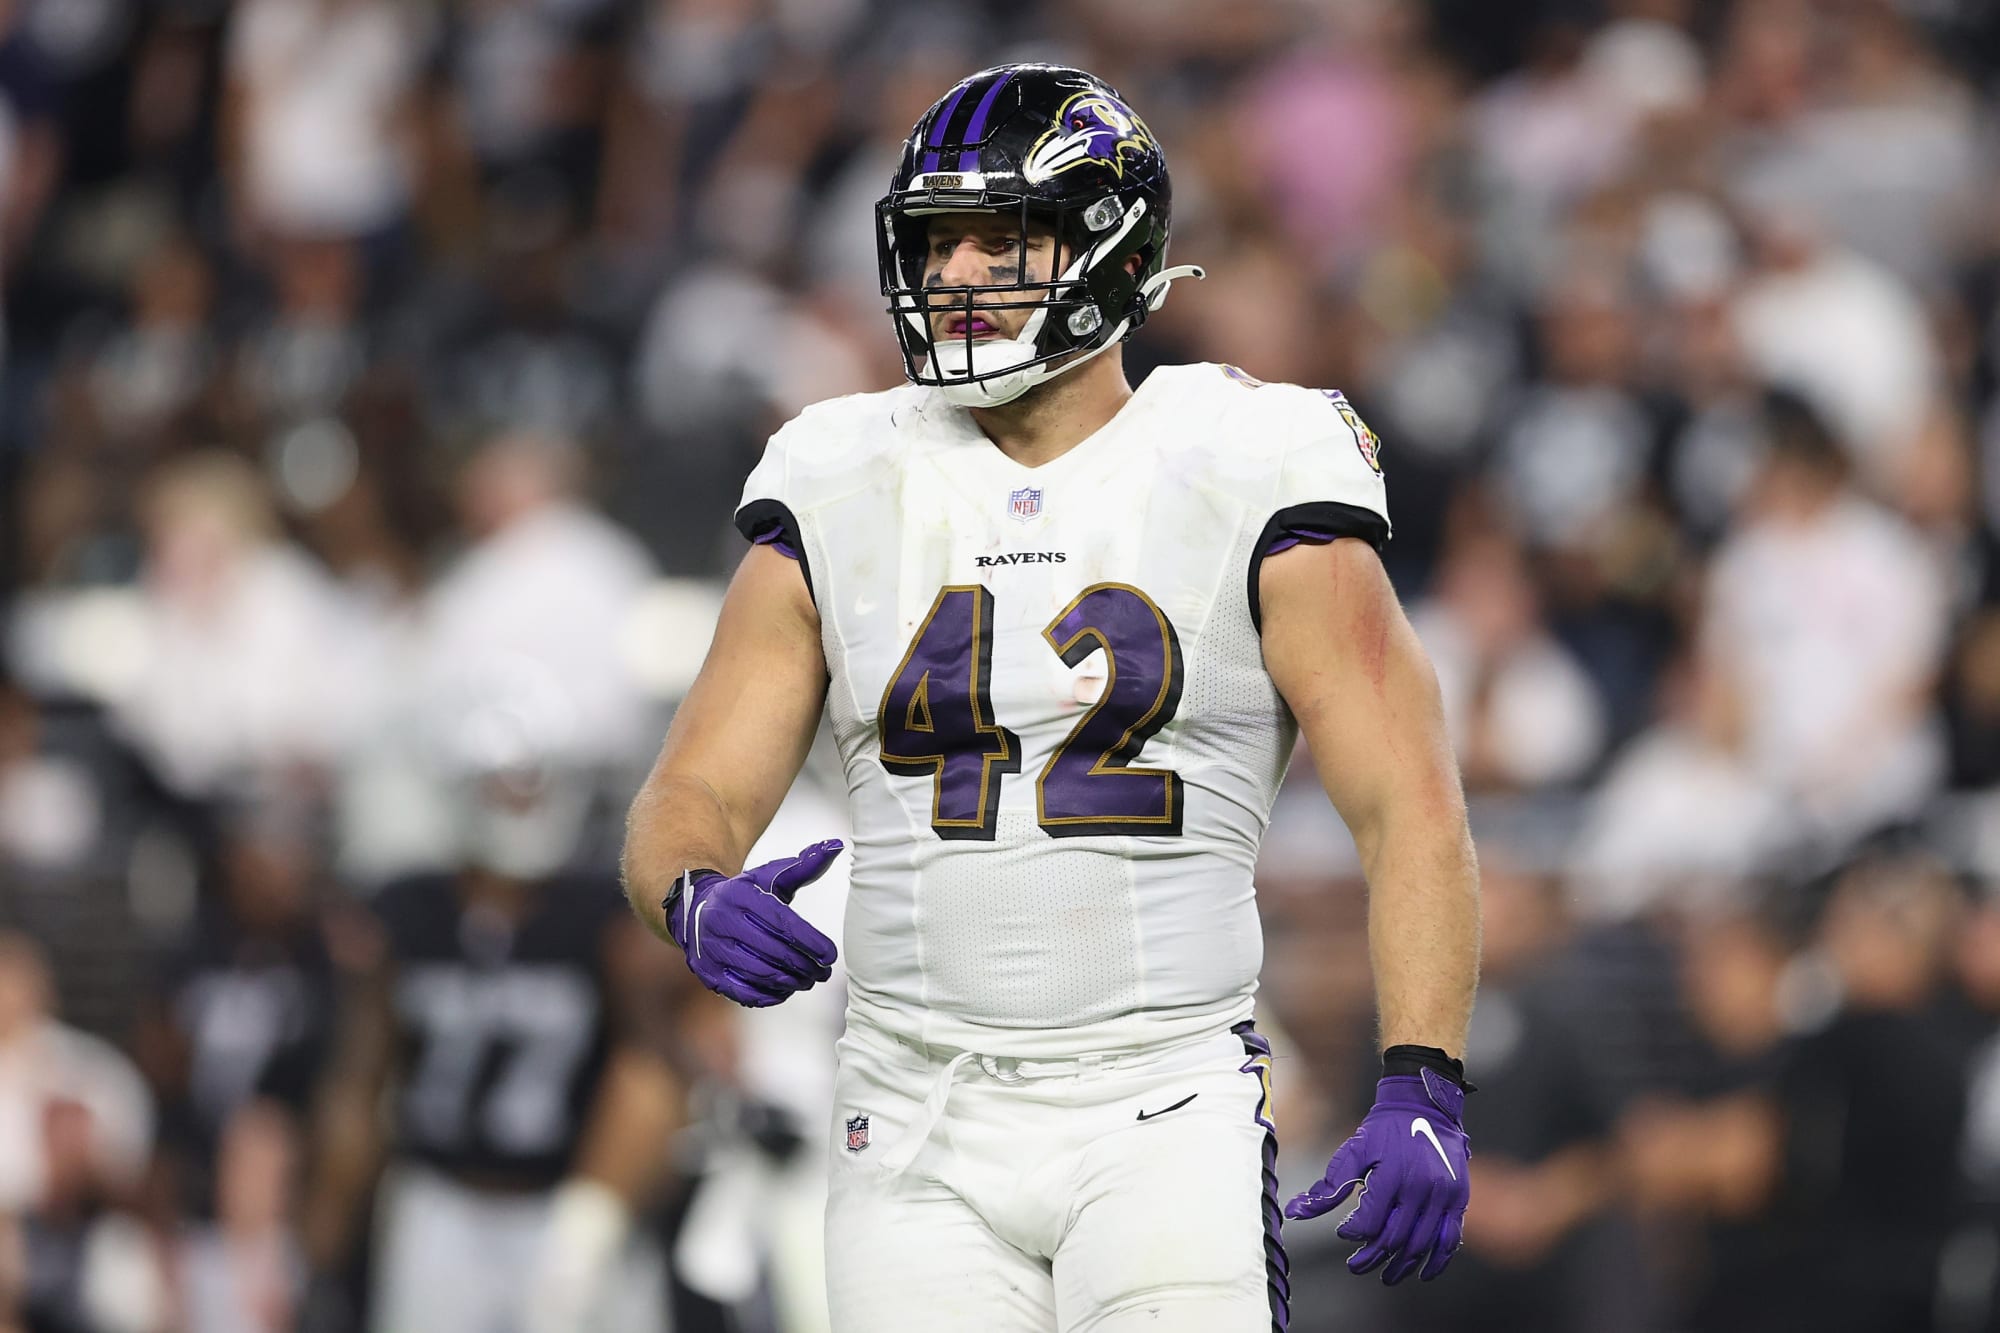 7 fullbacks the Ravens could draft to replace Patrick Ricard